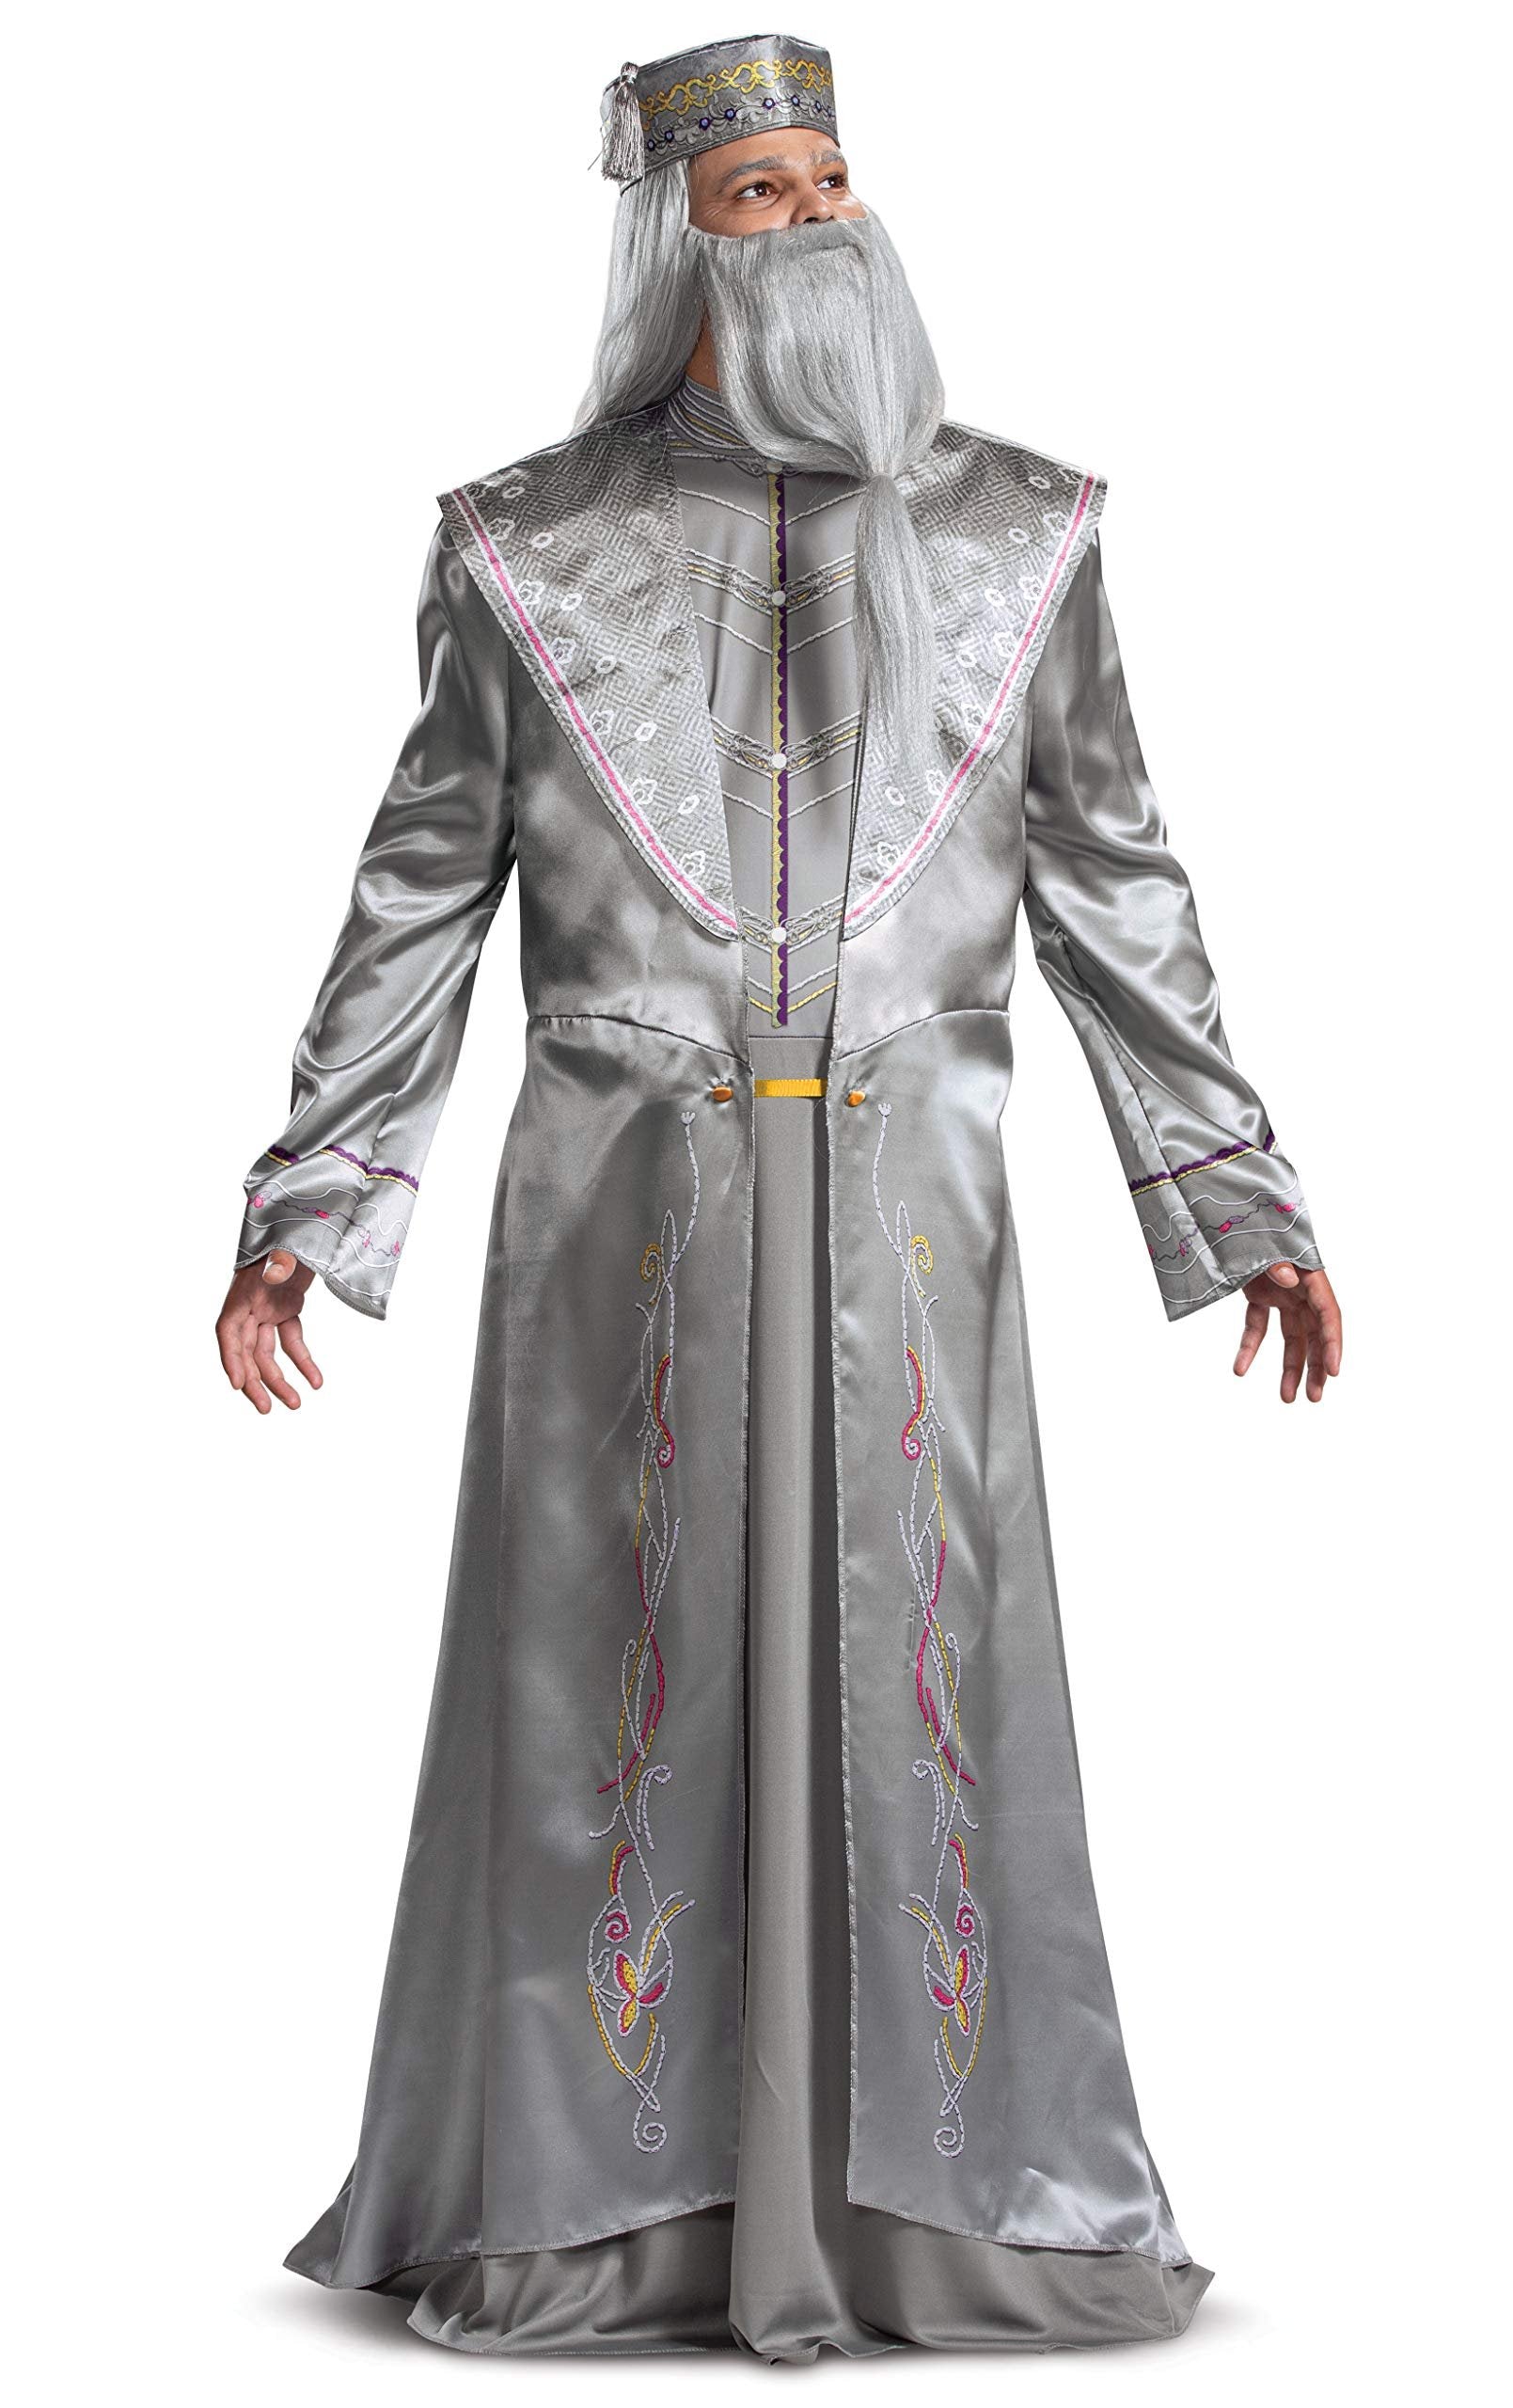 Disguise Harry Potter Dumbledore Costume XL 42-46 Silver Robe & Hat Outfit